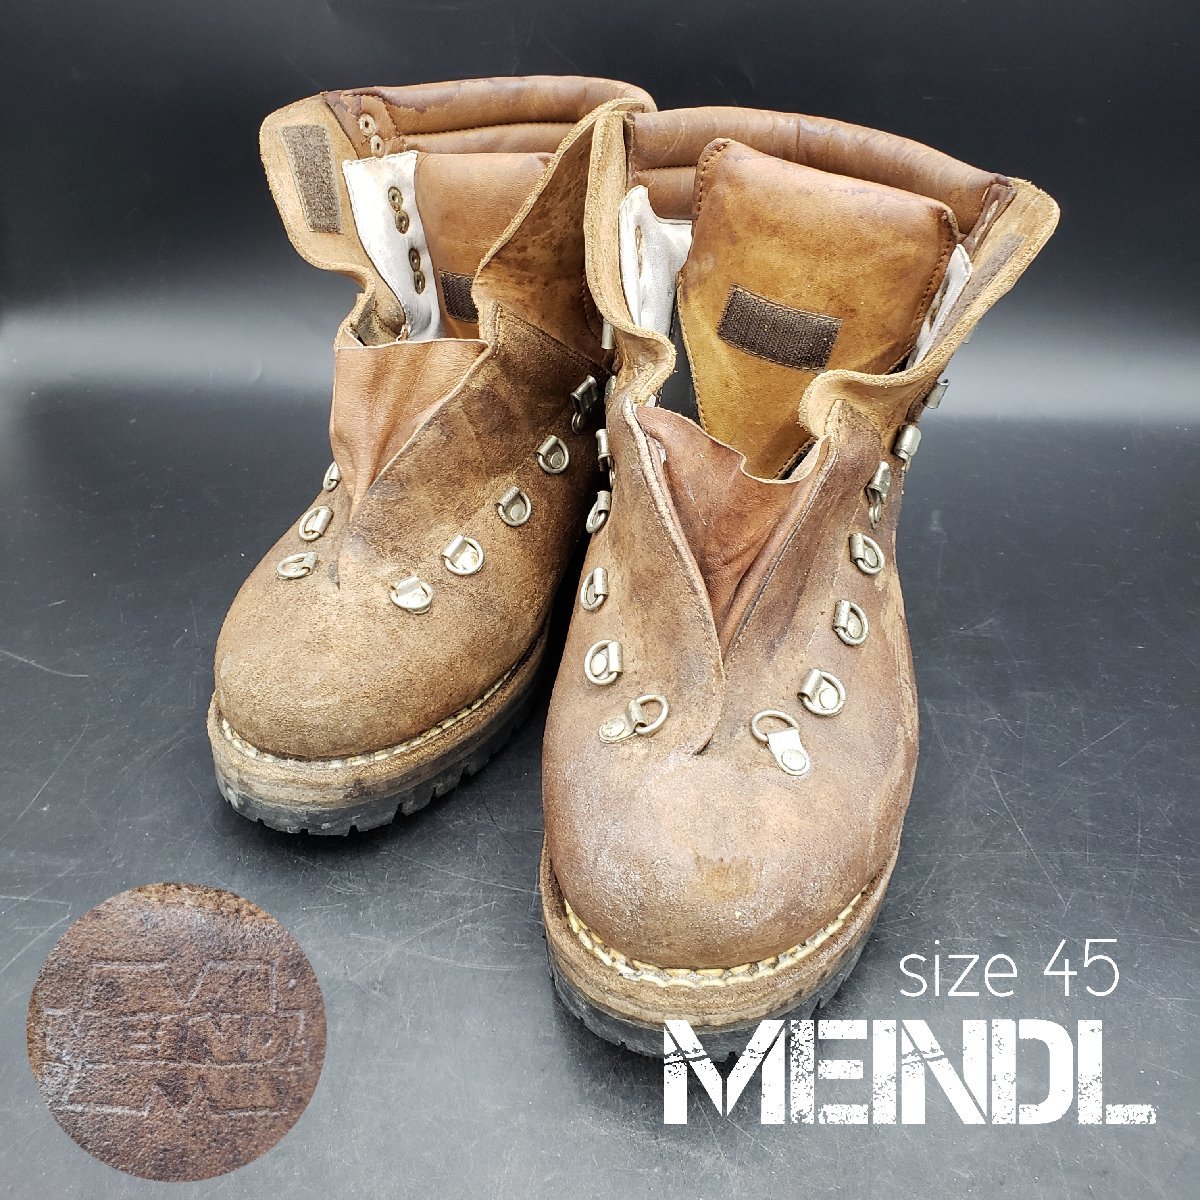 MEINDL mountain climbing shoes trekking shoes size : 45 27.5cmma India ru leather old model Vintage 9572 outdoor scratch * dirt equipped [100a1410]